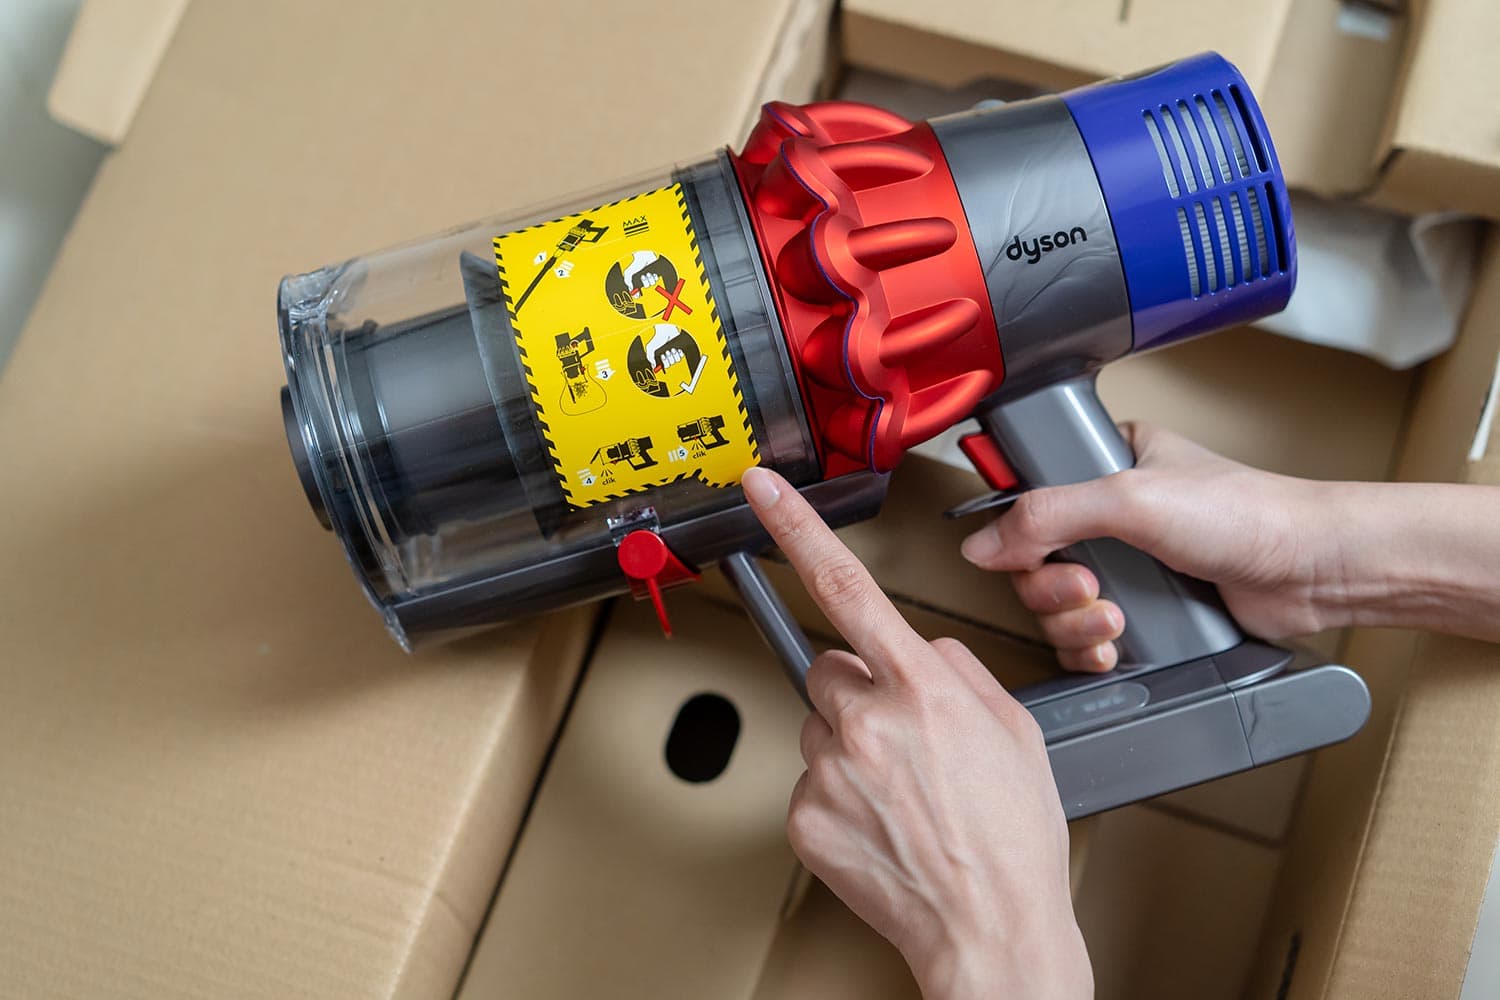 Dyson Cyclone V10 Fluffy vacuum cleaner during open box